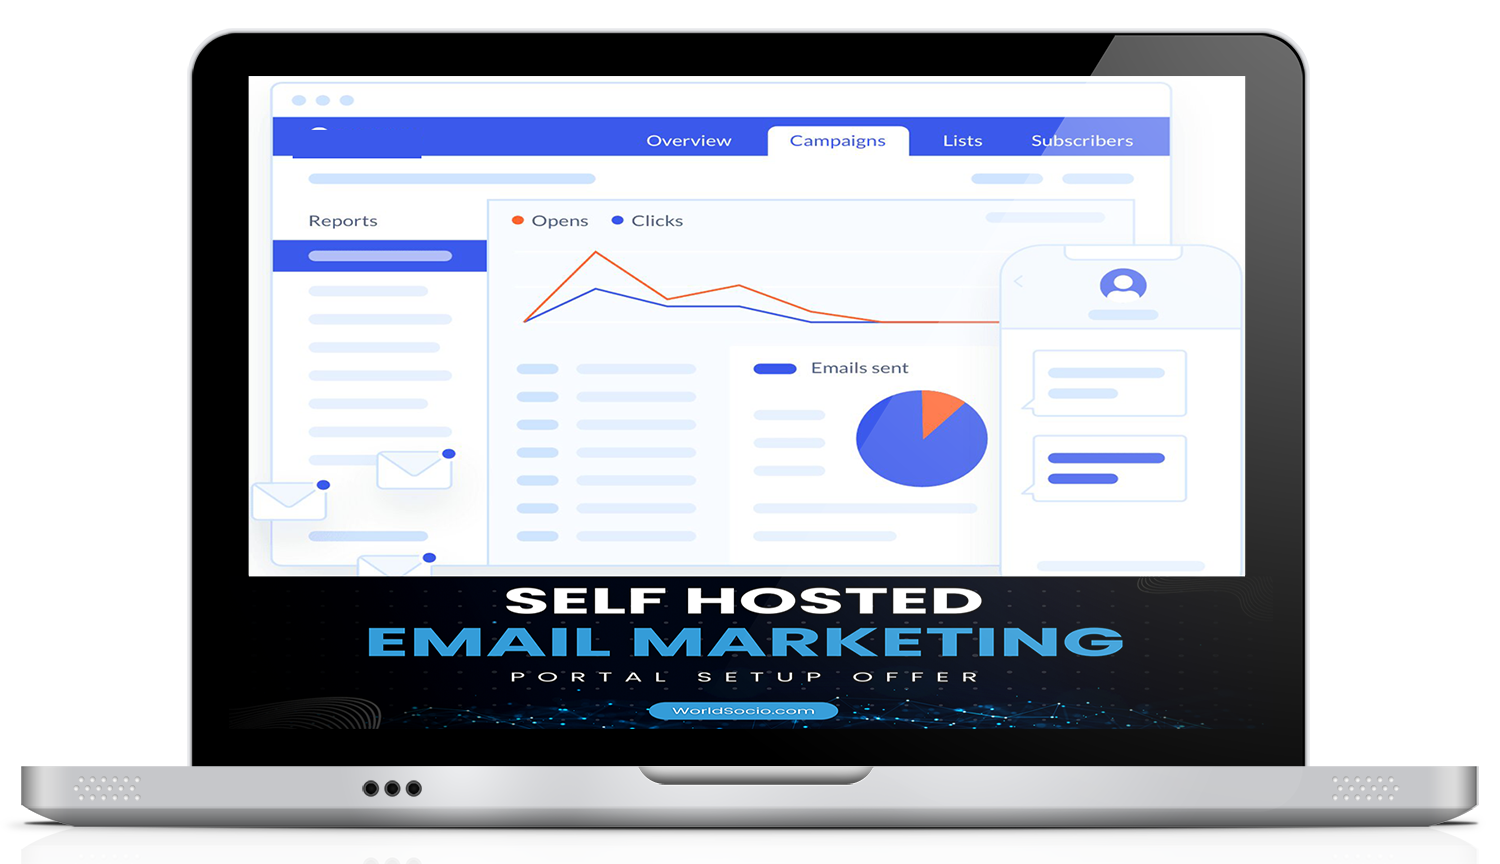 self-hosted-email-marketing-portal-setup-offer-by-mbonu-watson-world-socio-png.1264